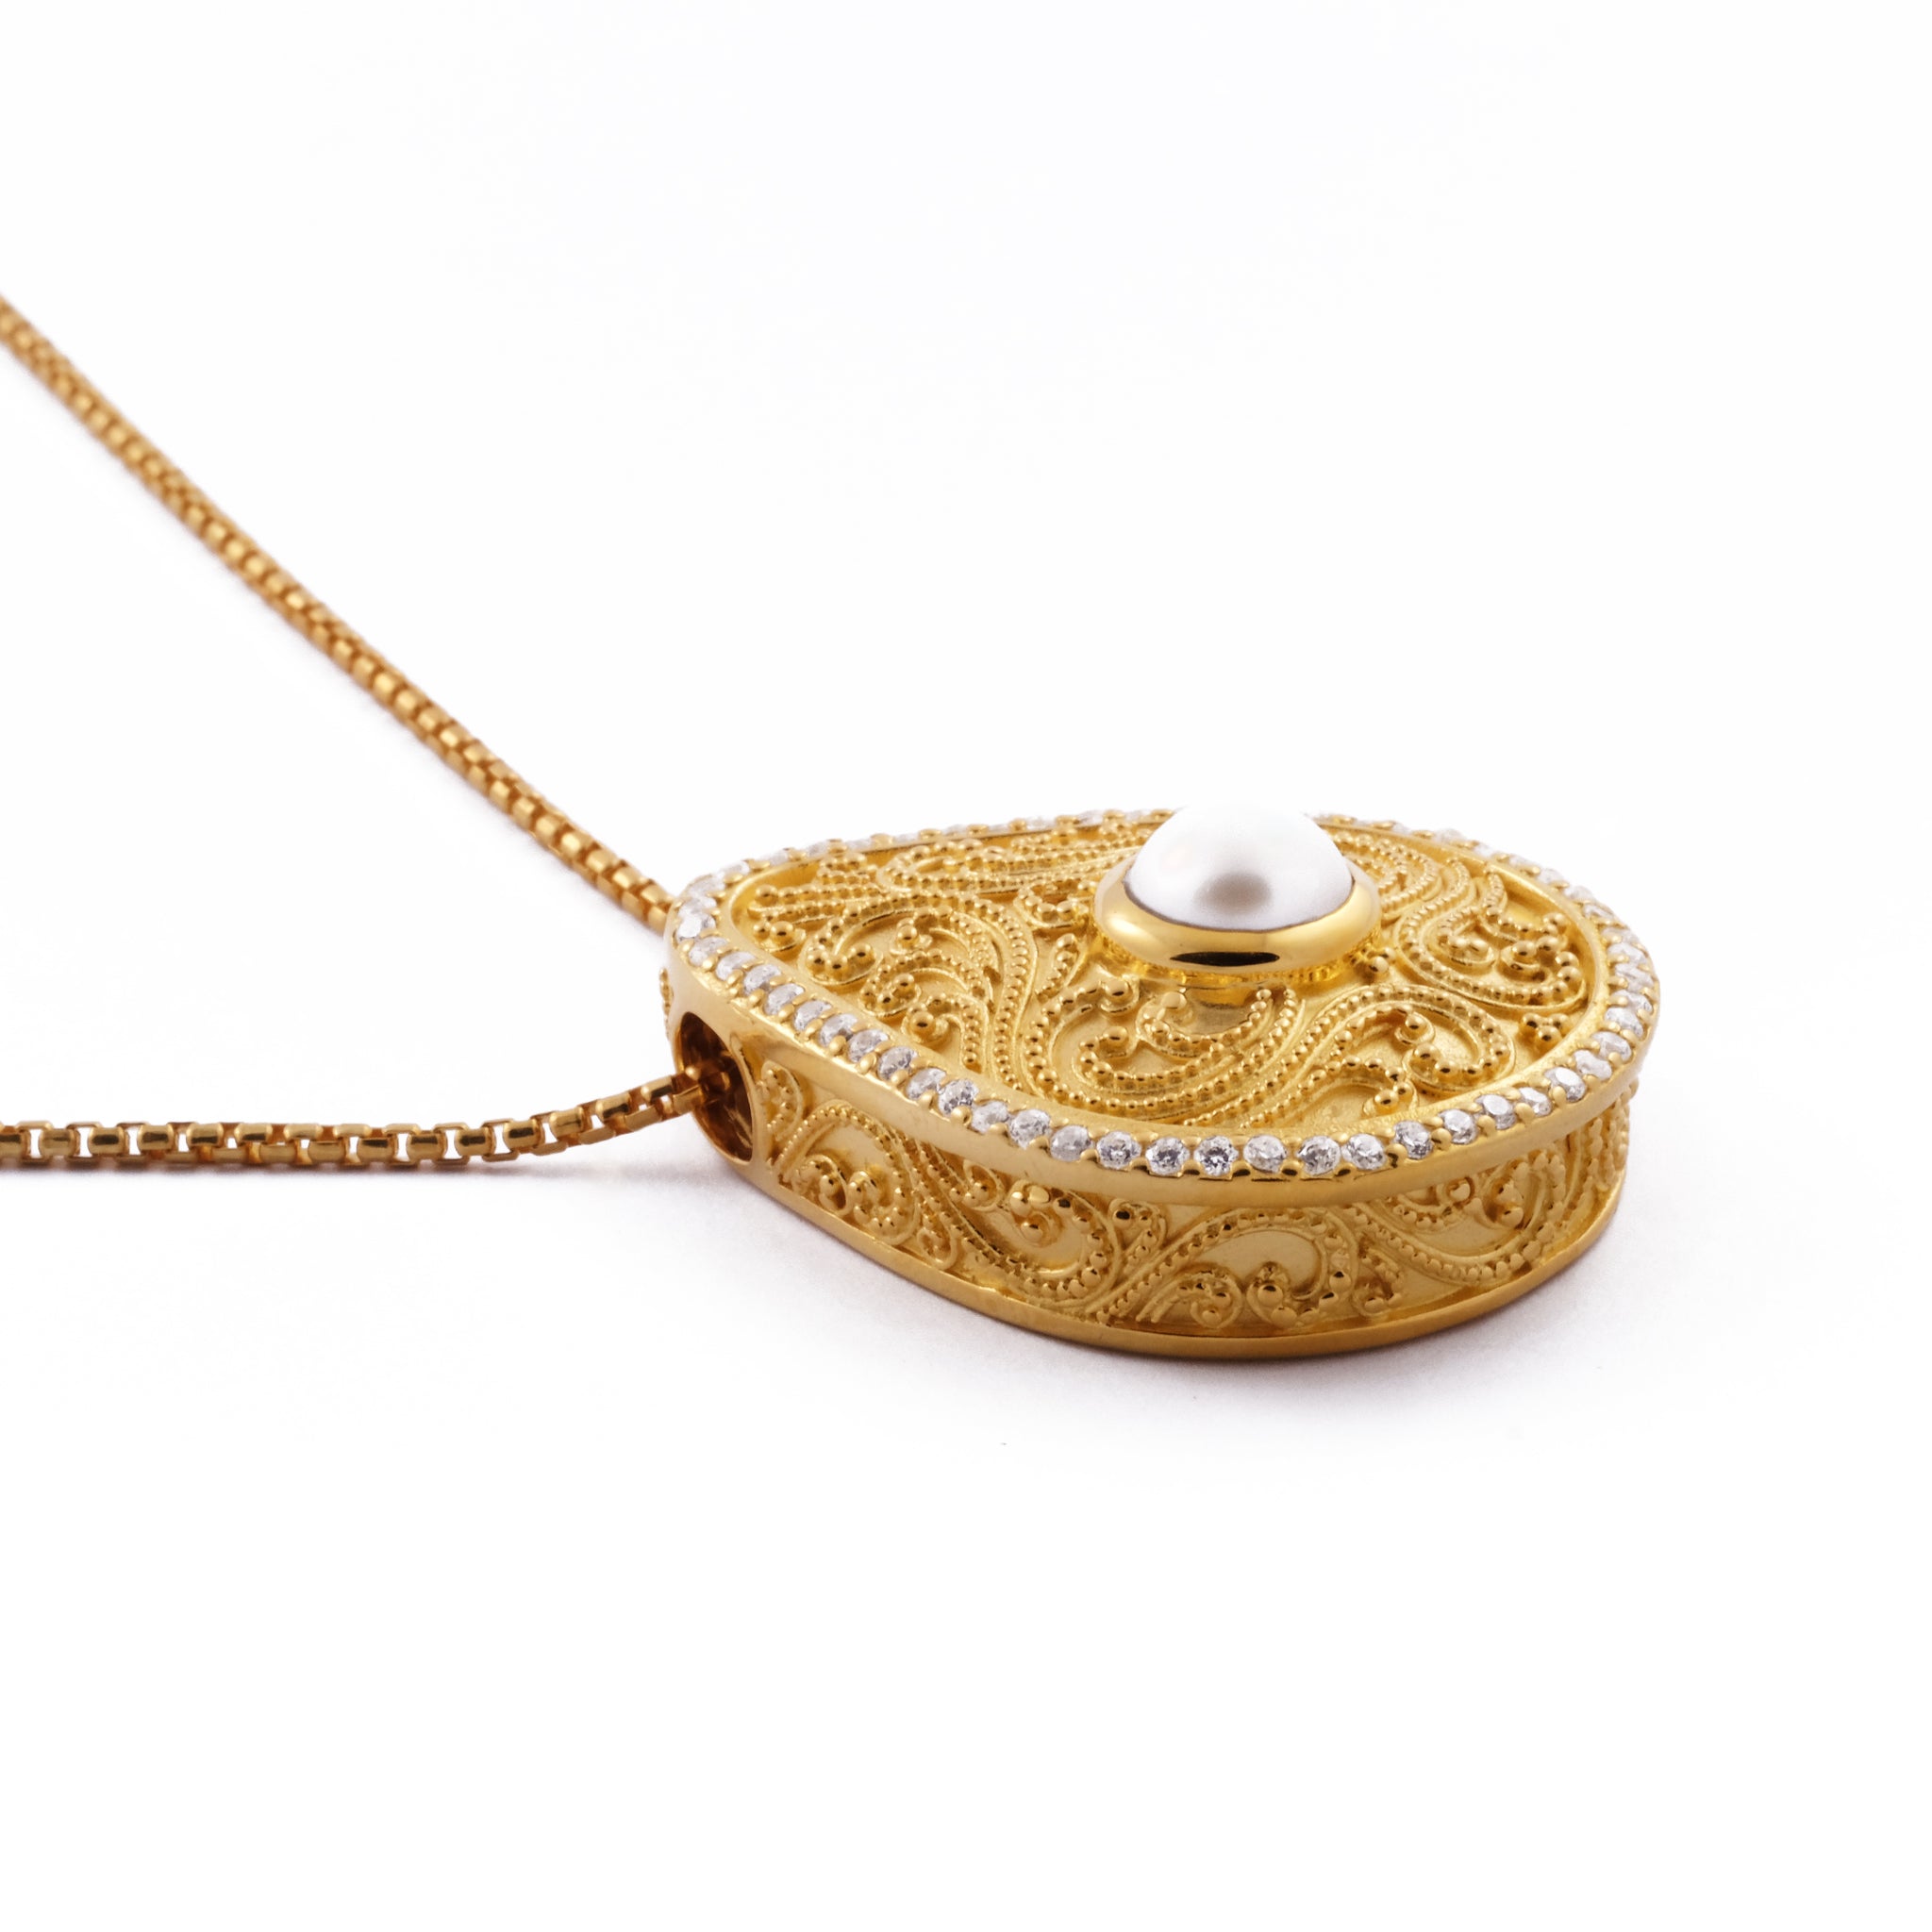 Tamiang Pendant (without necklace) 22k Gold Over Sterling Silver